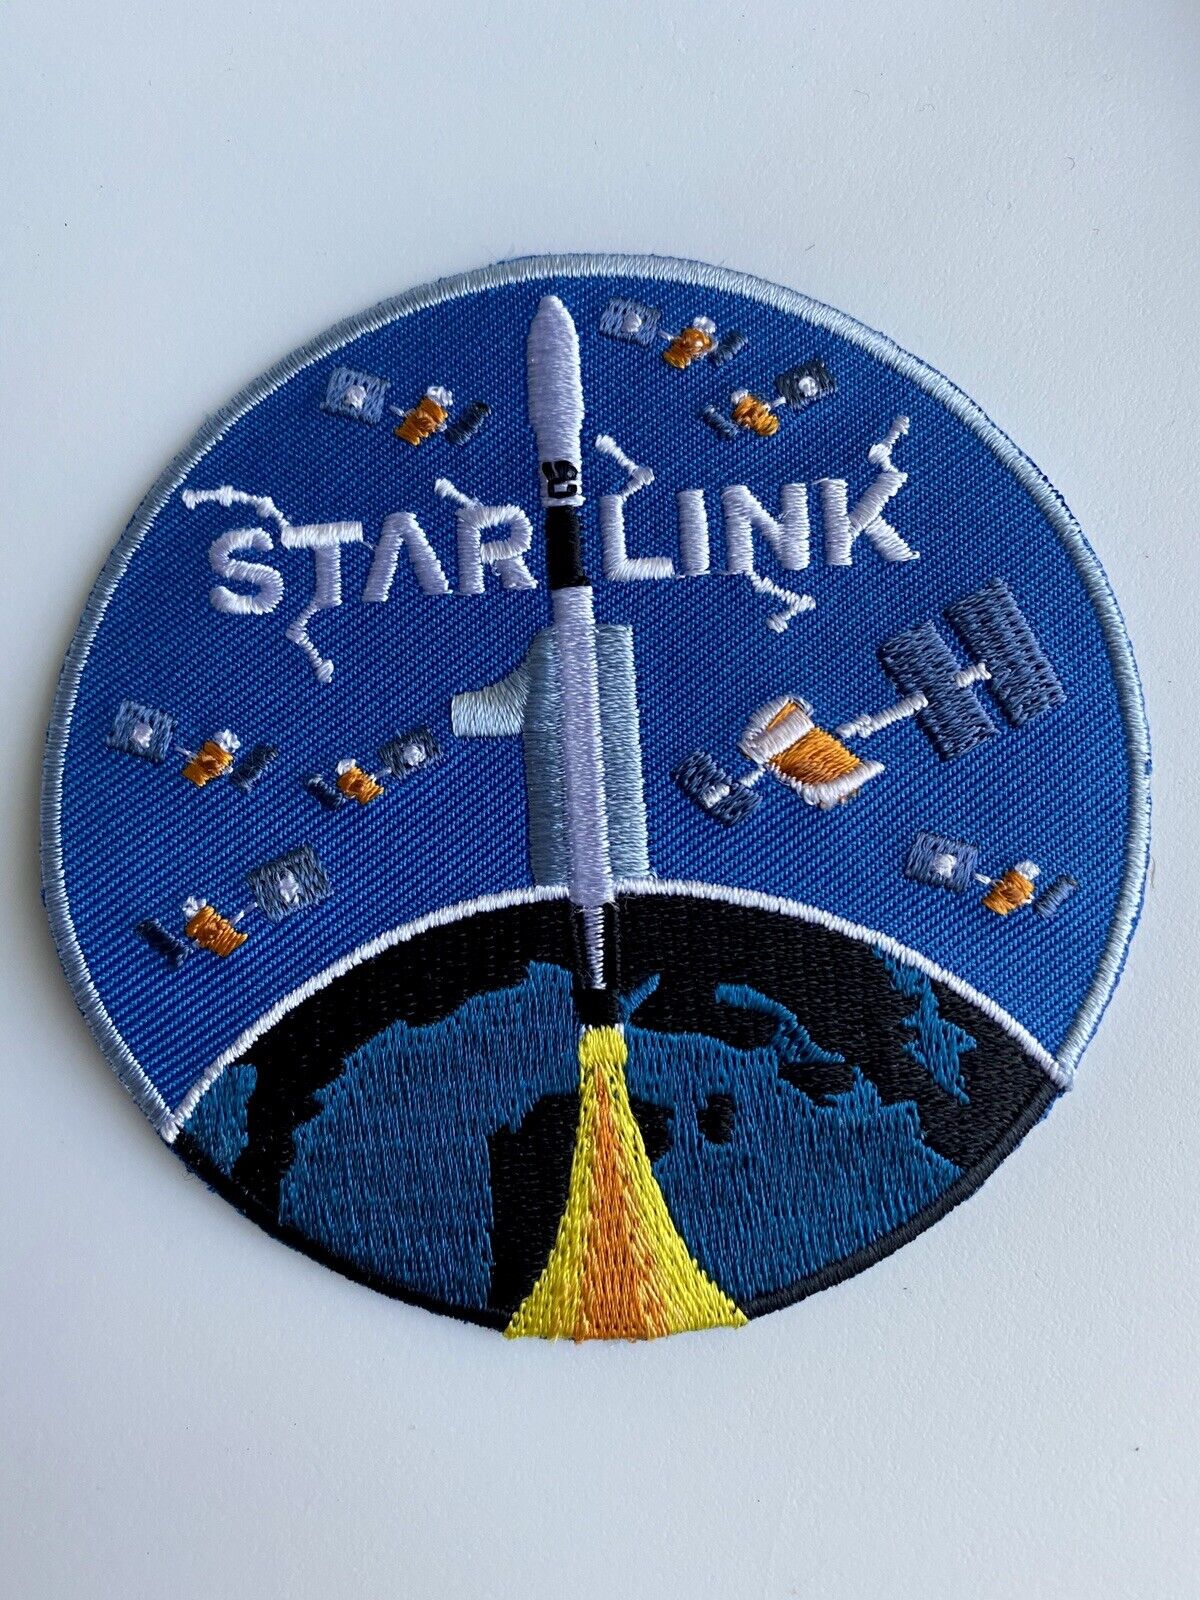 SpaceX ORIGINAL STARLINK 1 FALCON 9 MISSION PATCH 3.5”